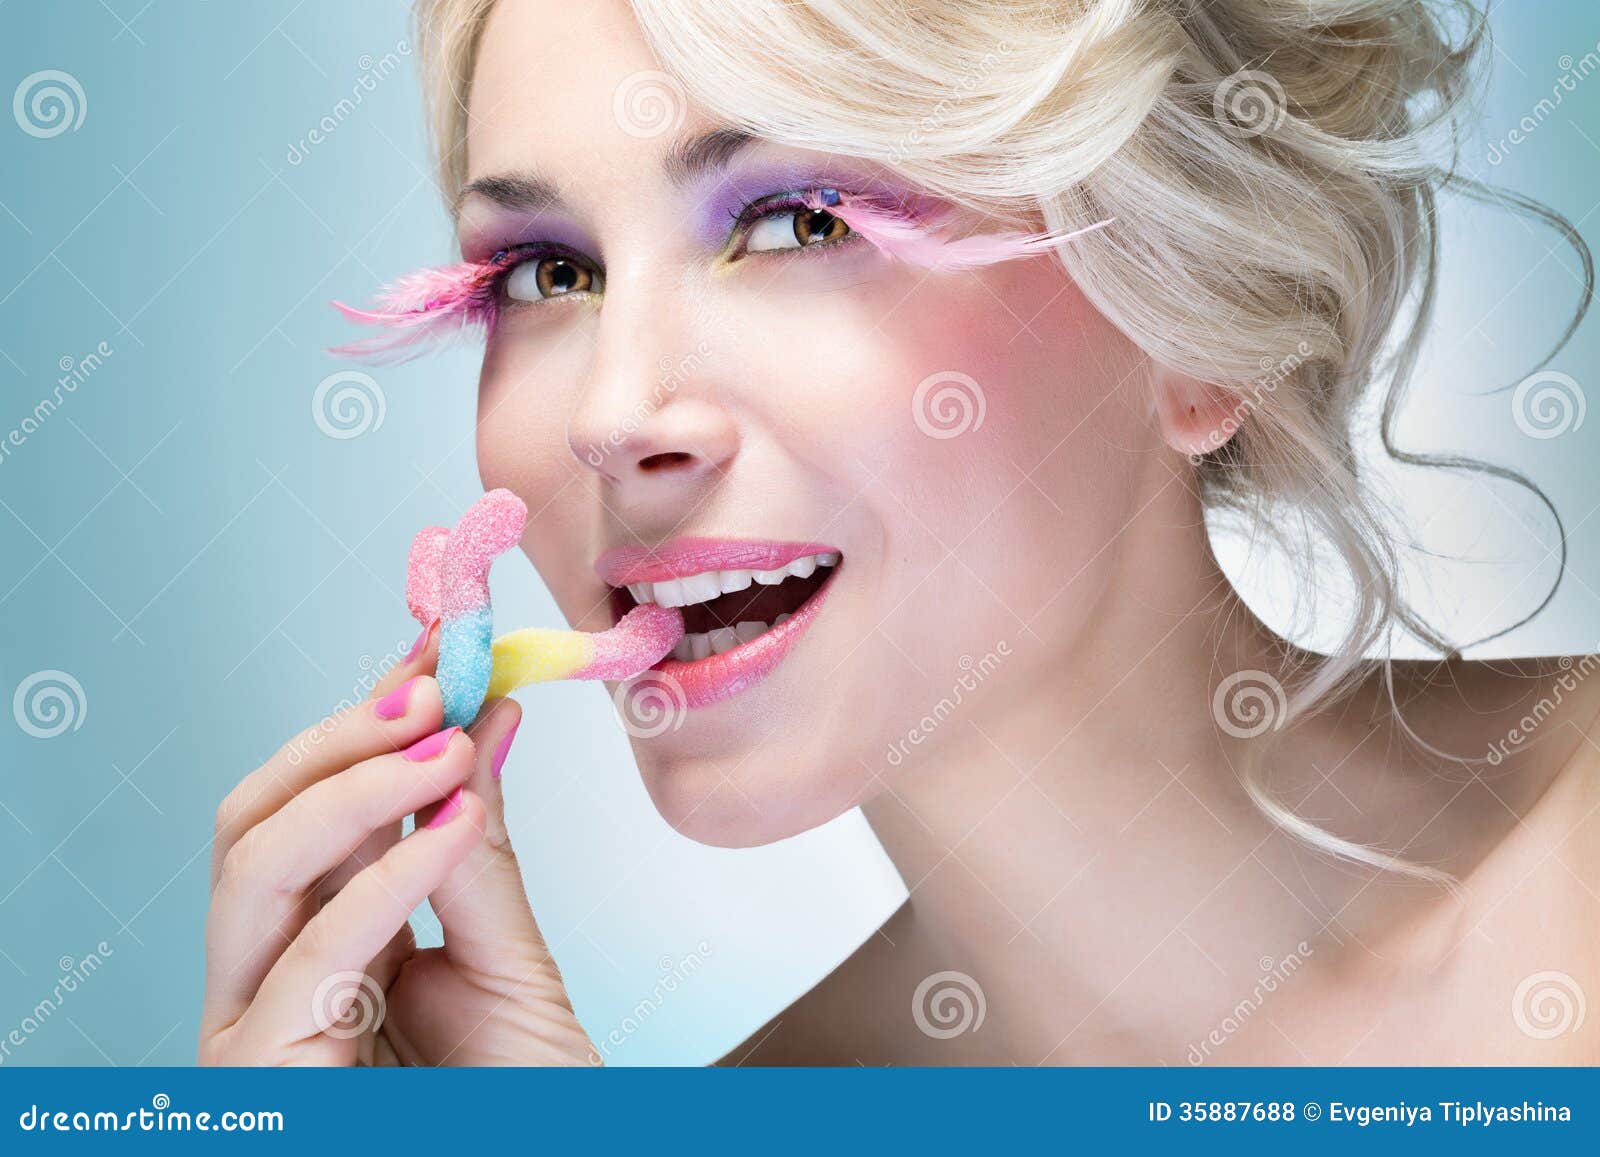 eating candy stock photo. Image of happy, jelly - 35887688